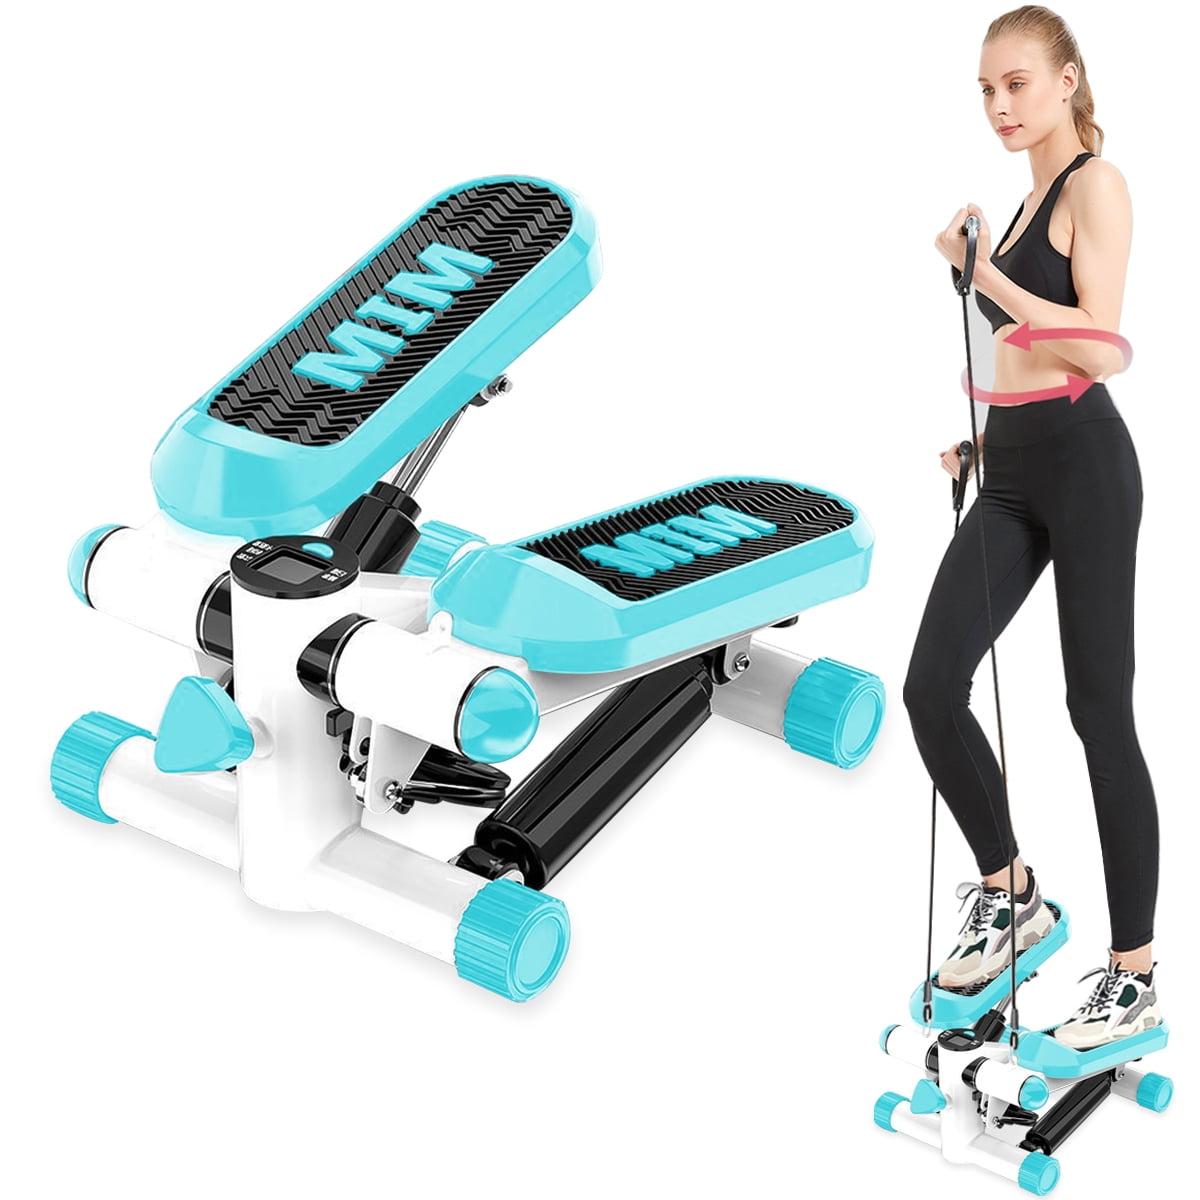 Step Fitness Machines Household Mute Armrest Multi-Function Exercise Sports Stepper Trainer Machine Resistance Bands LCD Monitor Air Climber【Ship from USA】